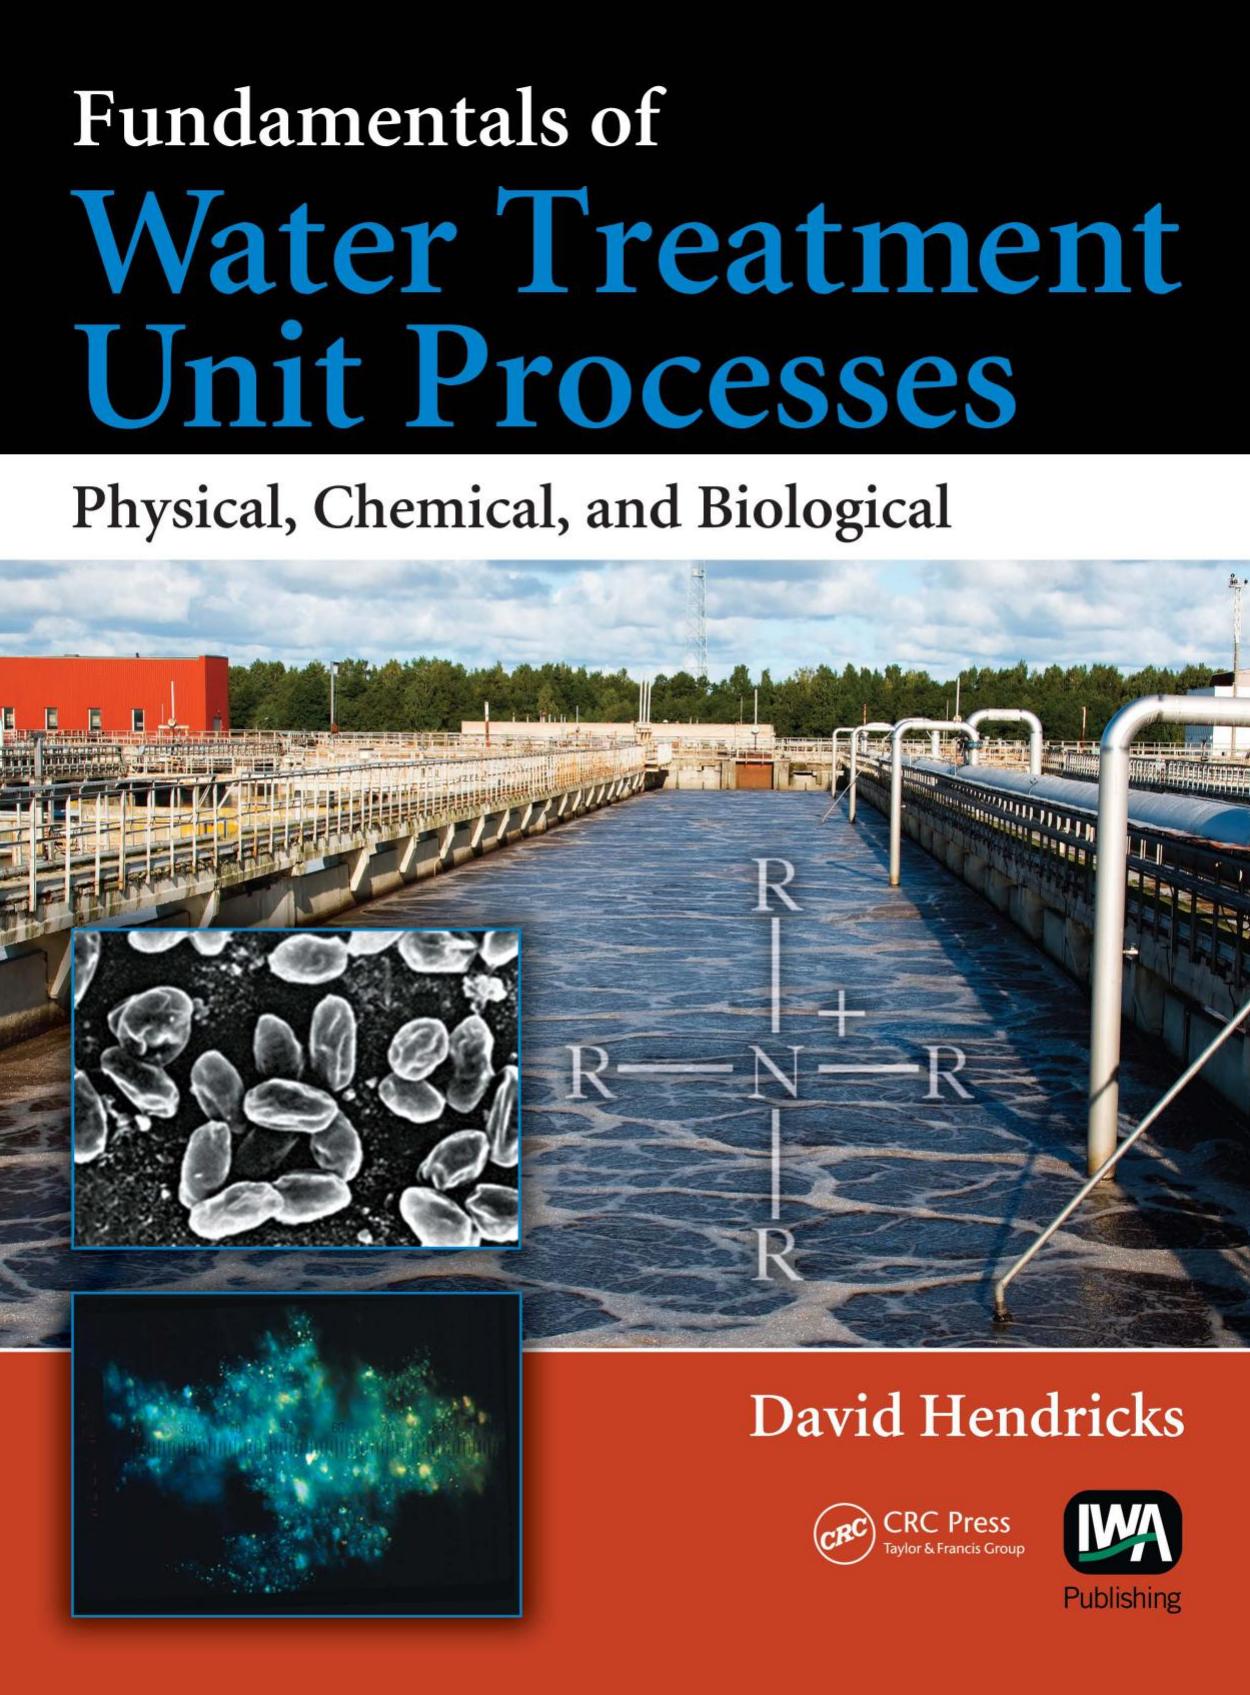 Fundamentals of water treatment unit processes physical, chemical, and biological 2011